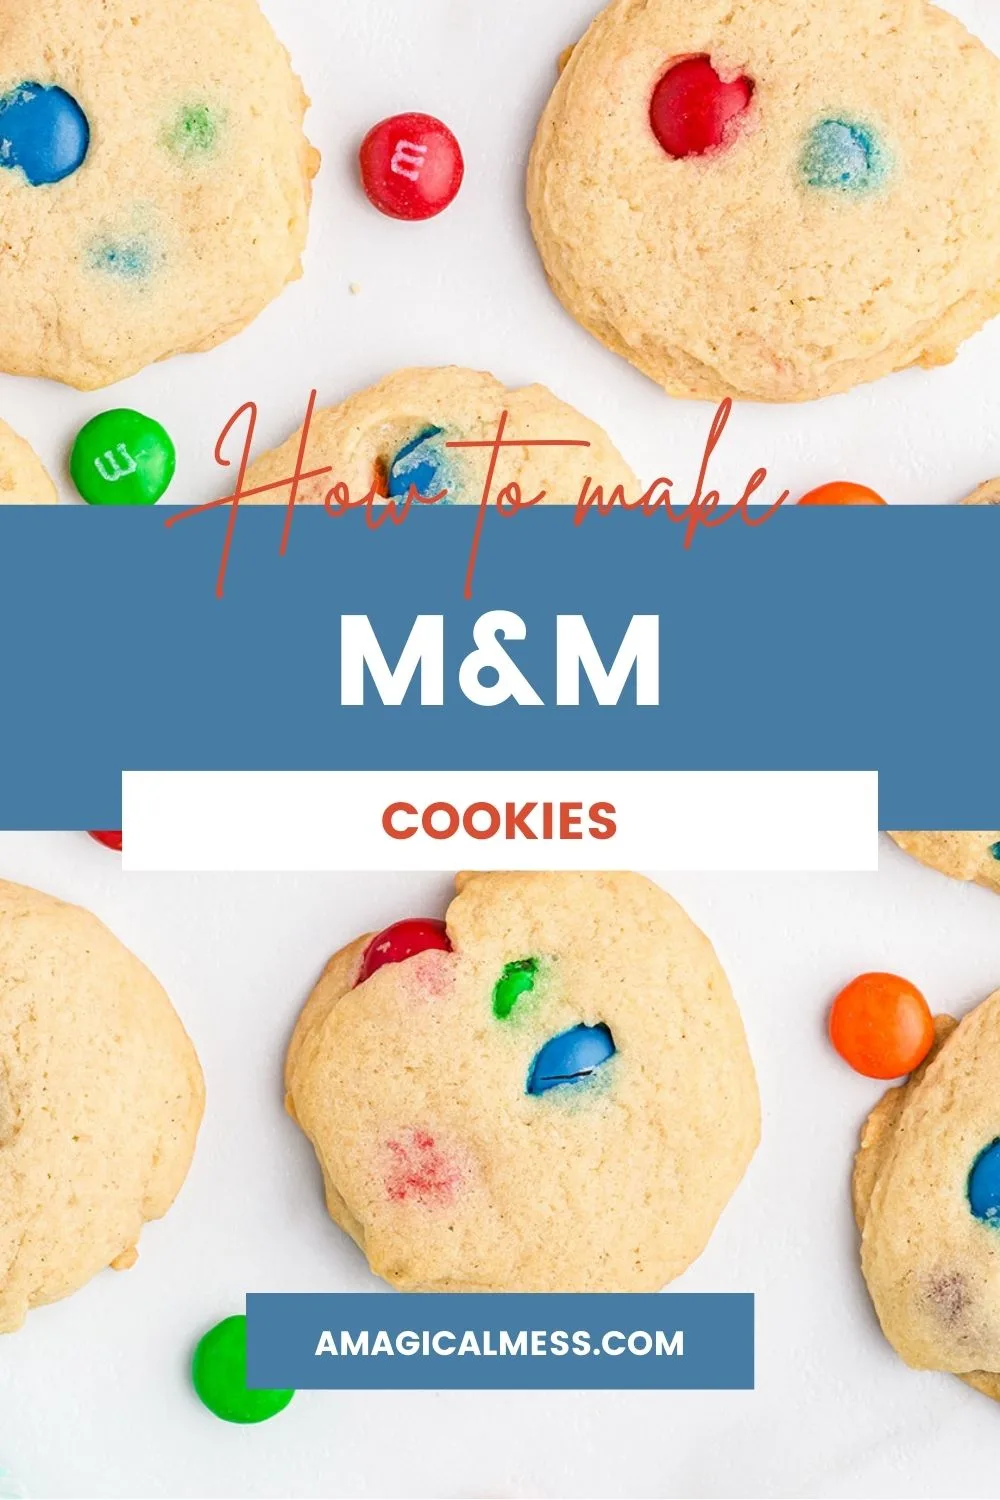 Cookies with M&M candies in them.